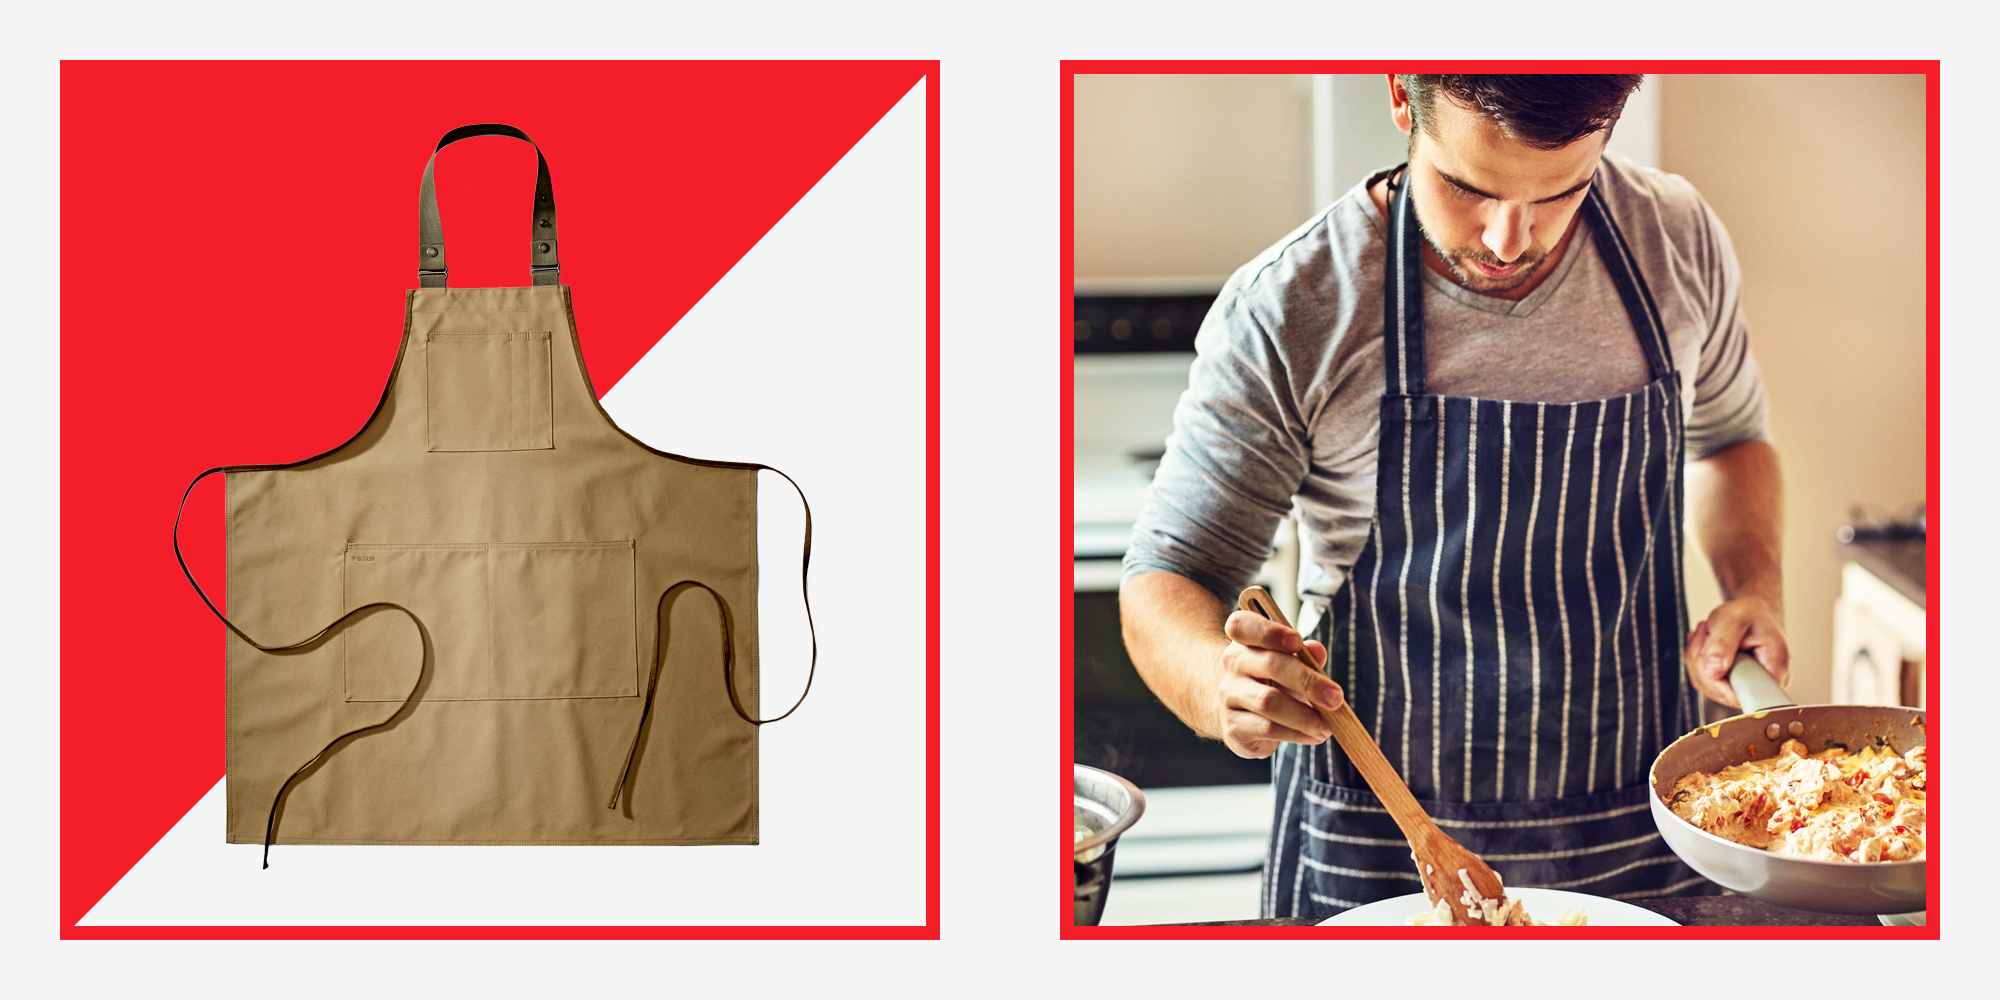 Funny Kitchen Aprons for Cooking Chief Cook and Bottle Washer 